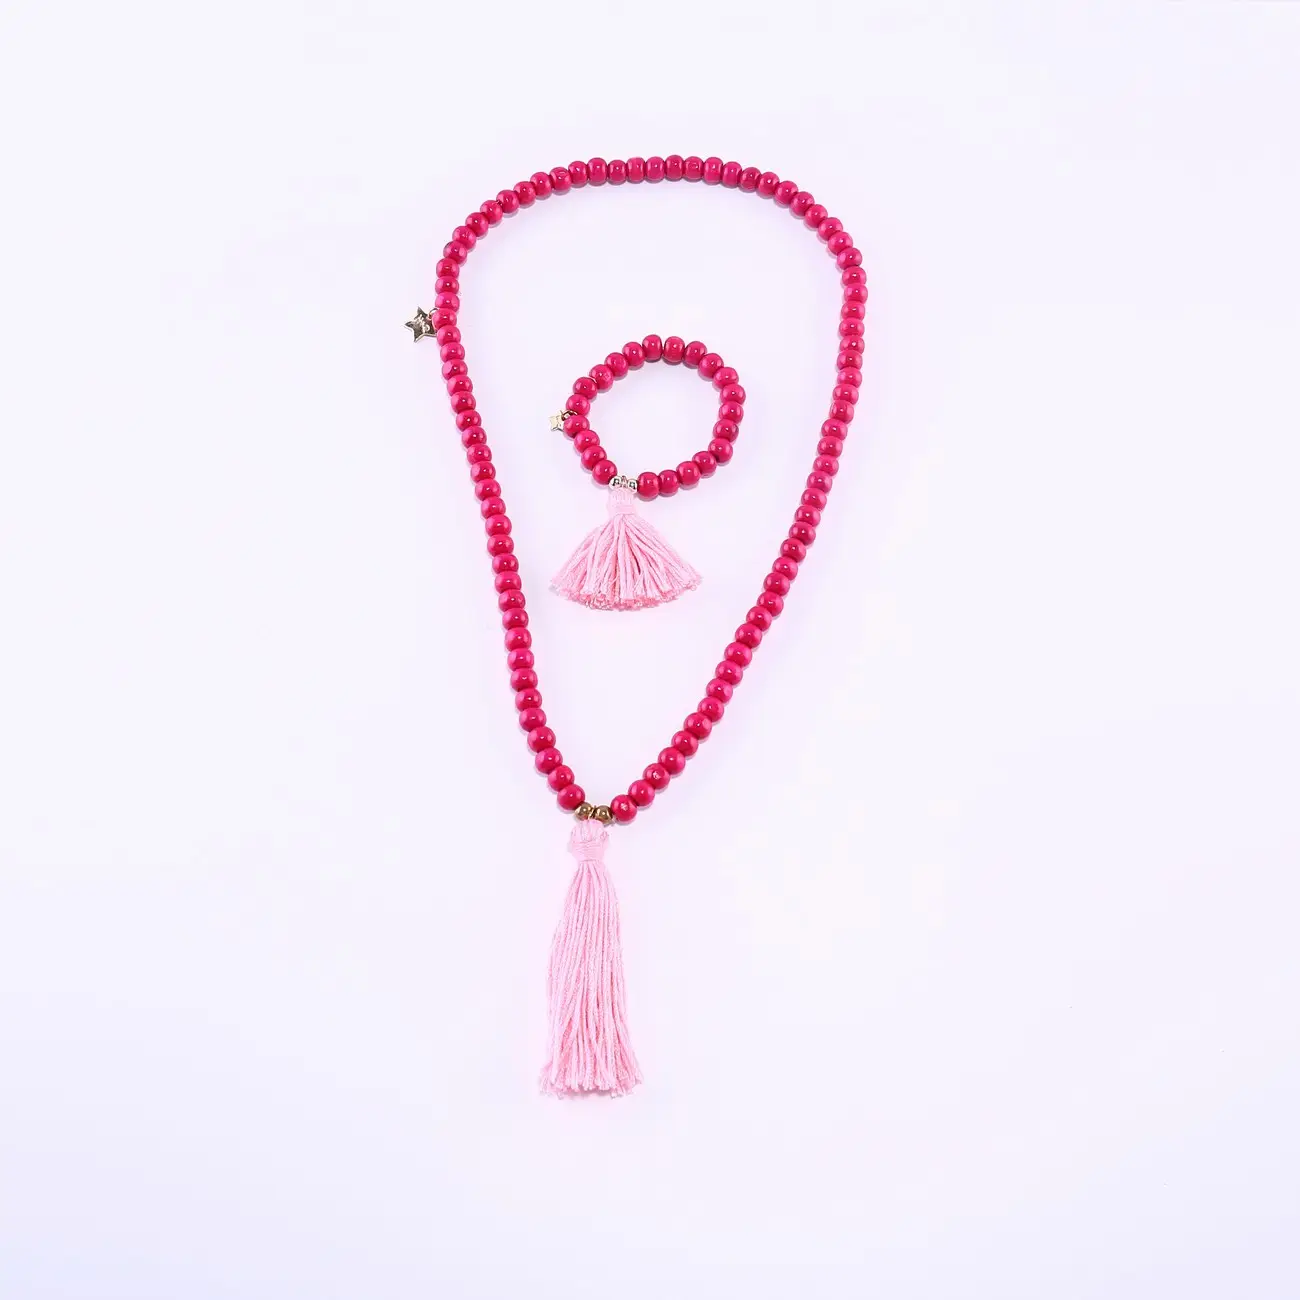 Necklace Bracelet Set for Children Pink Wood Beads with Tassel Necklace Accessories Wholesale